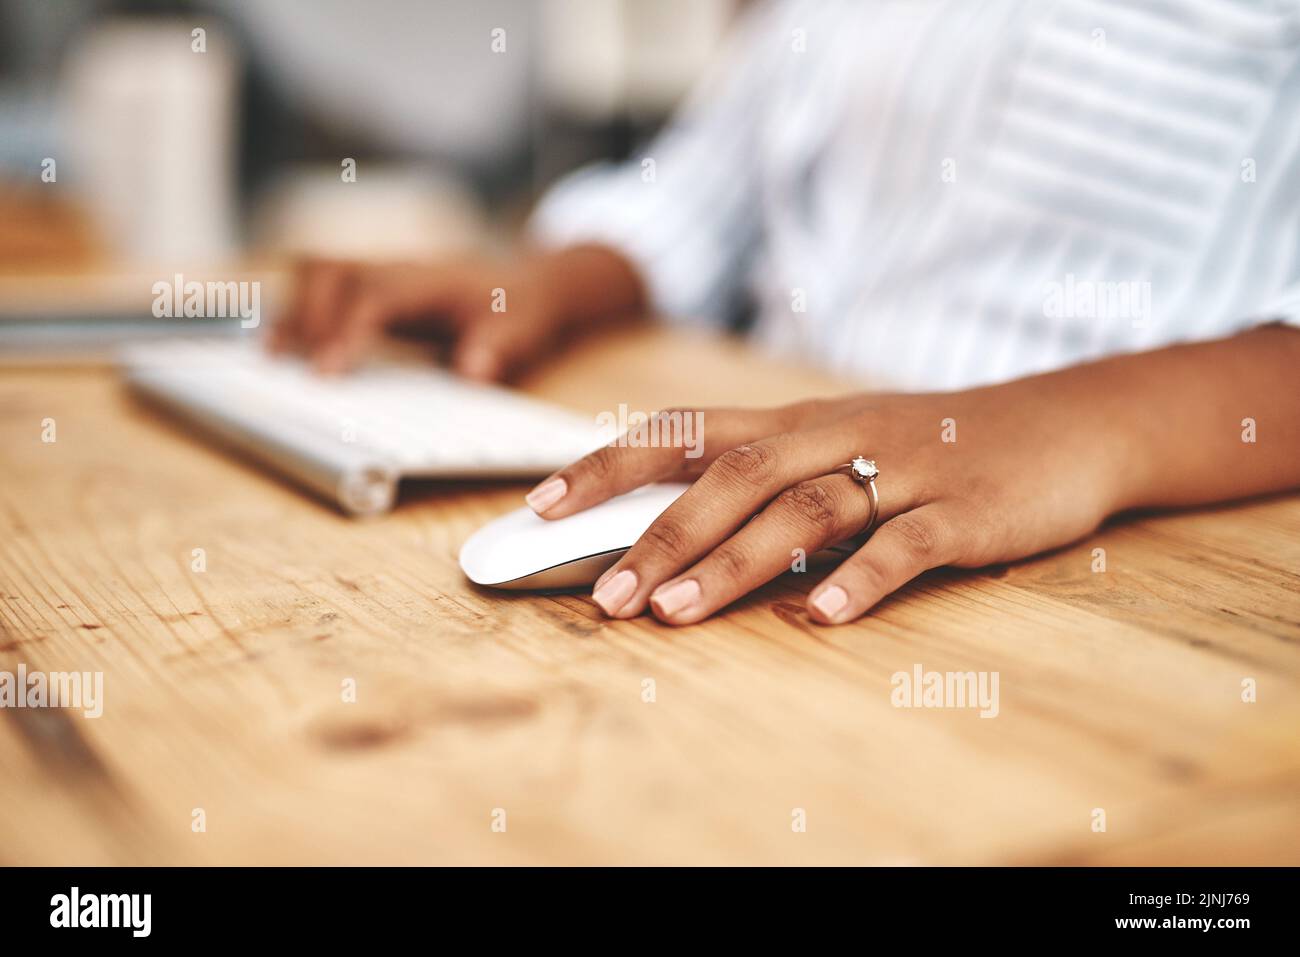 Hand on a mouse, clicking and scrolling while browsing online and surfing the internet. Closeup of a woman using a computer while sitting at a wooden Stock Photo